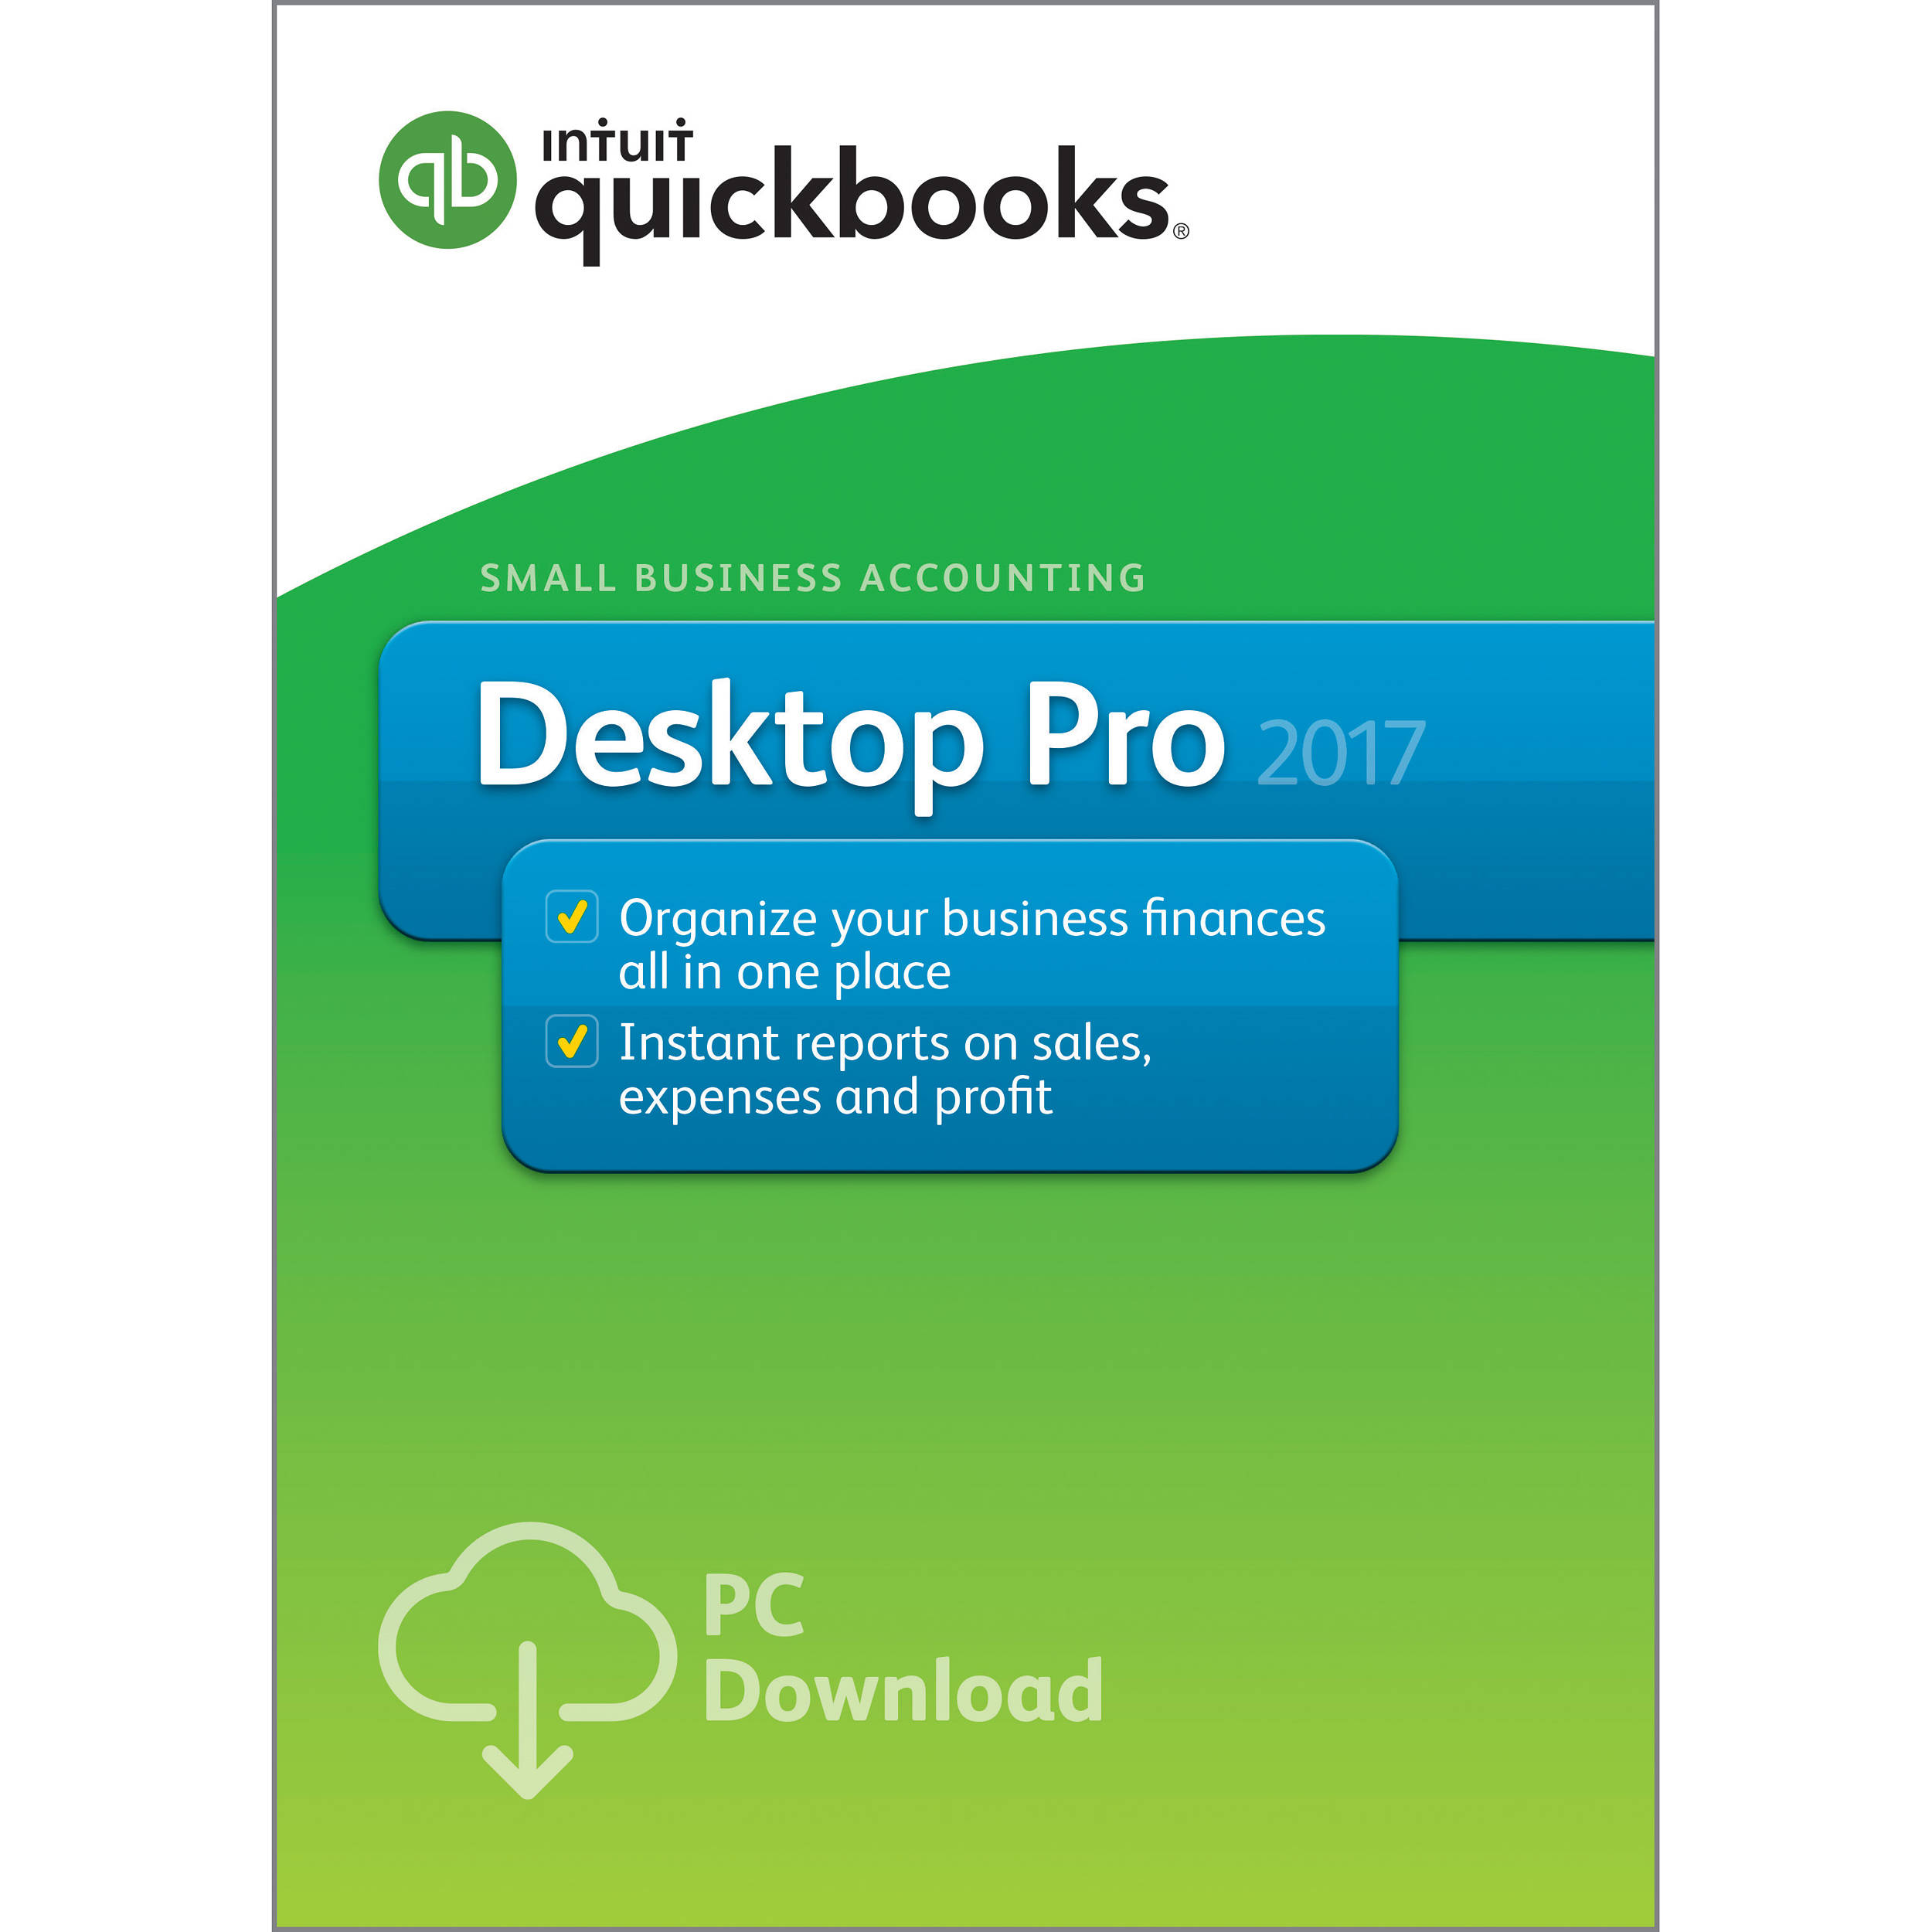 customize email templates on quickbooks for mac 2016